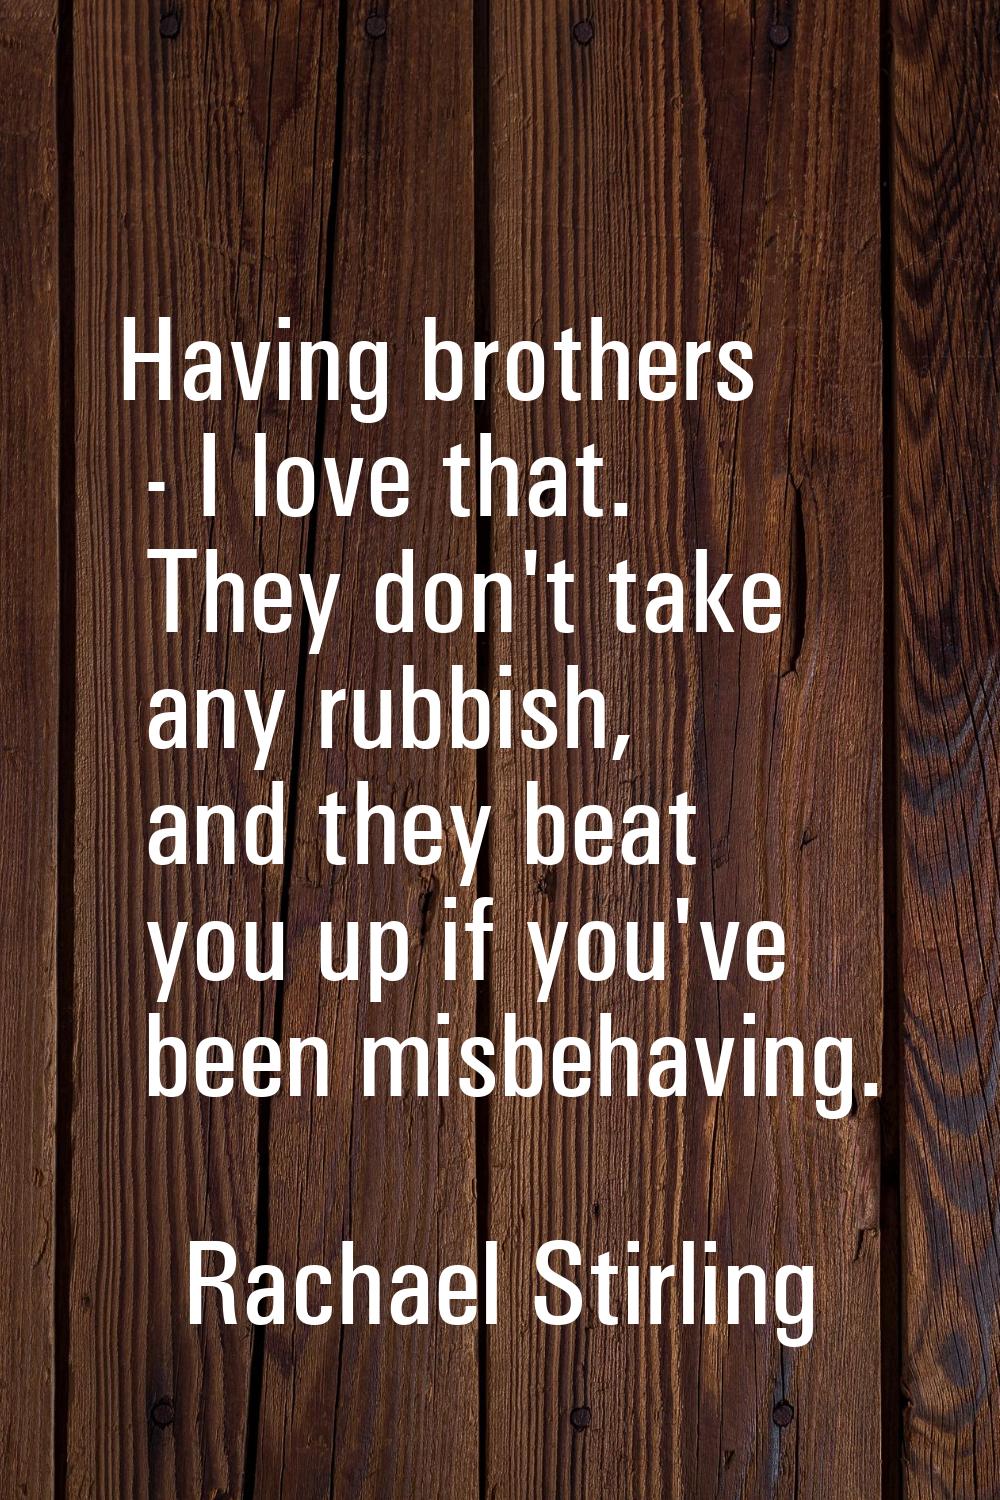 Having brothers - I love that. They don't take any rubbish, and they beat you up if you've been mis